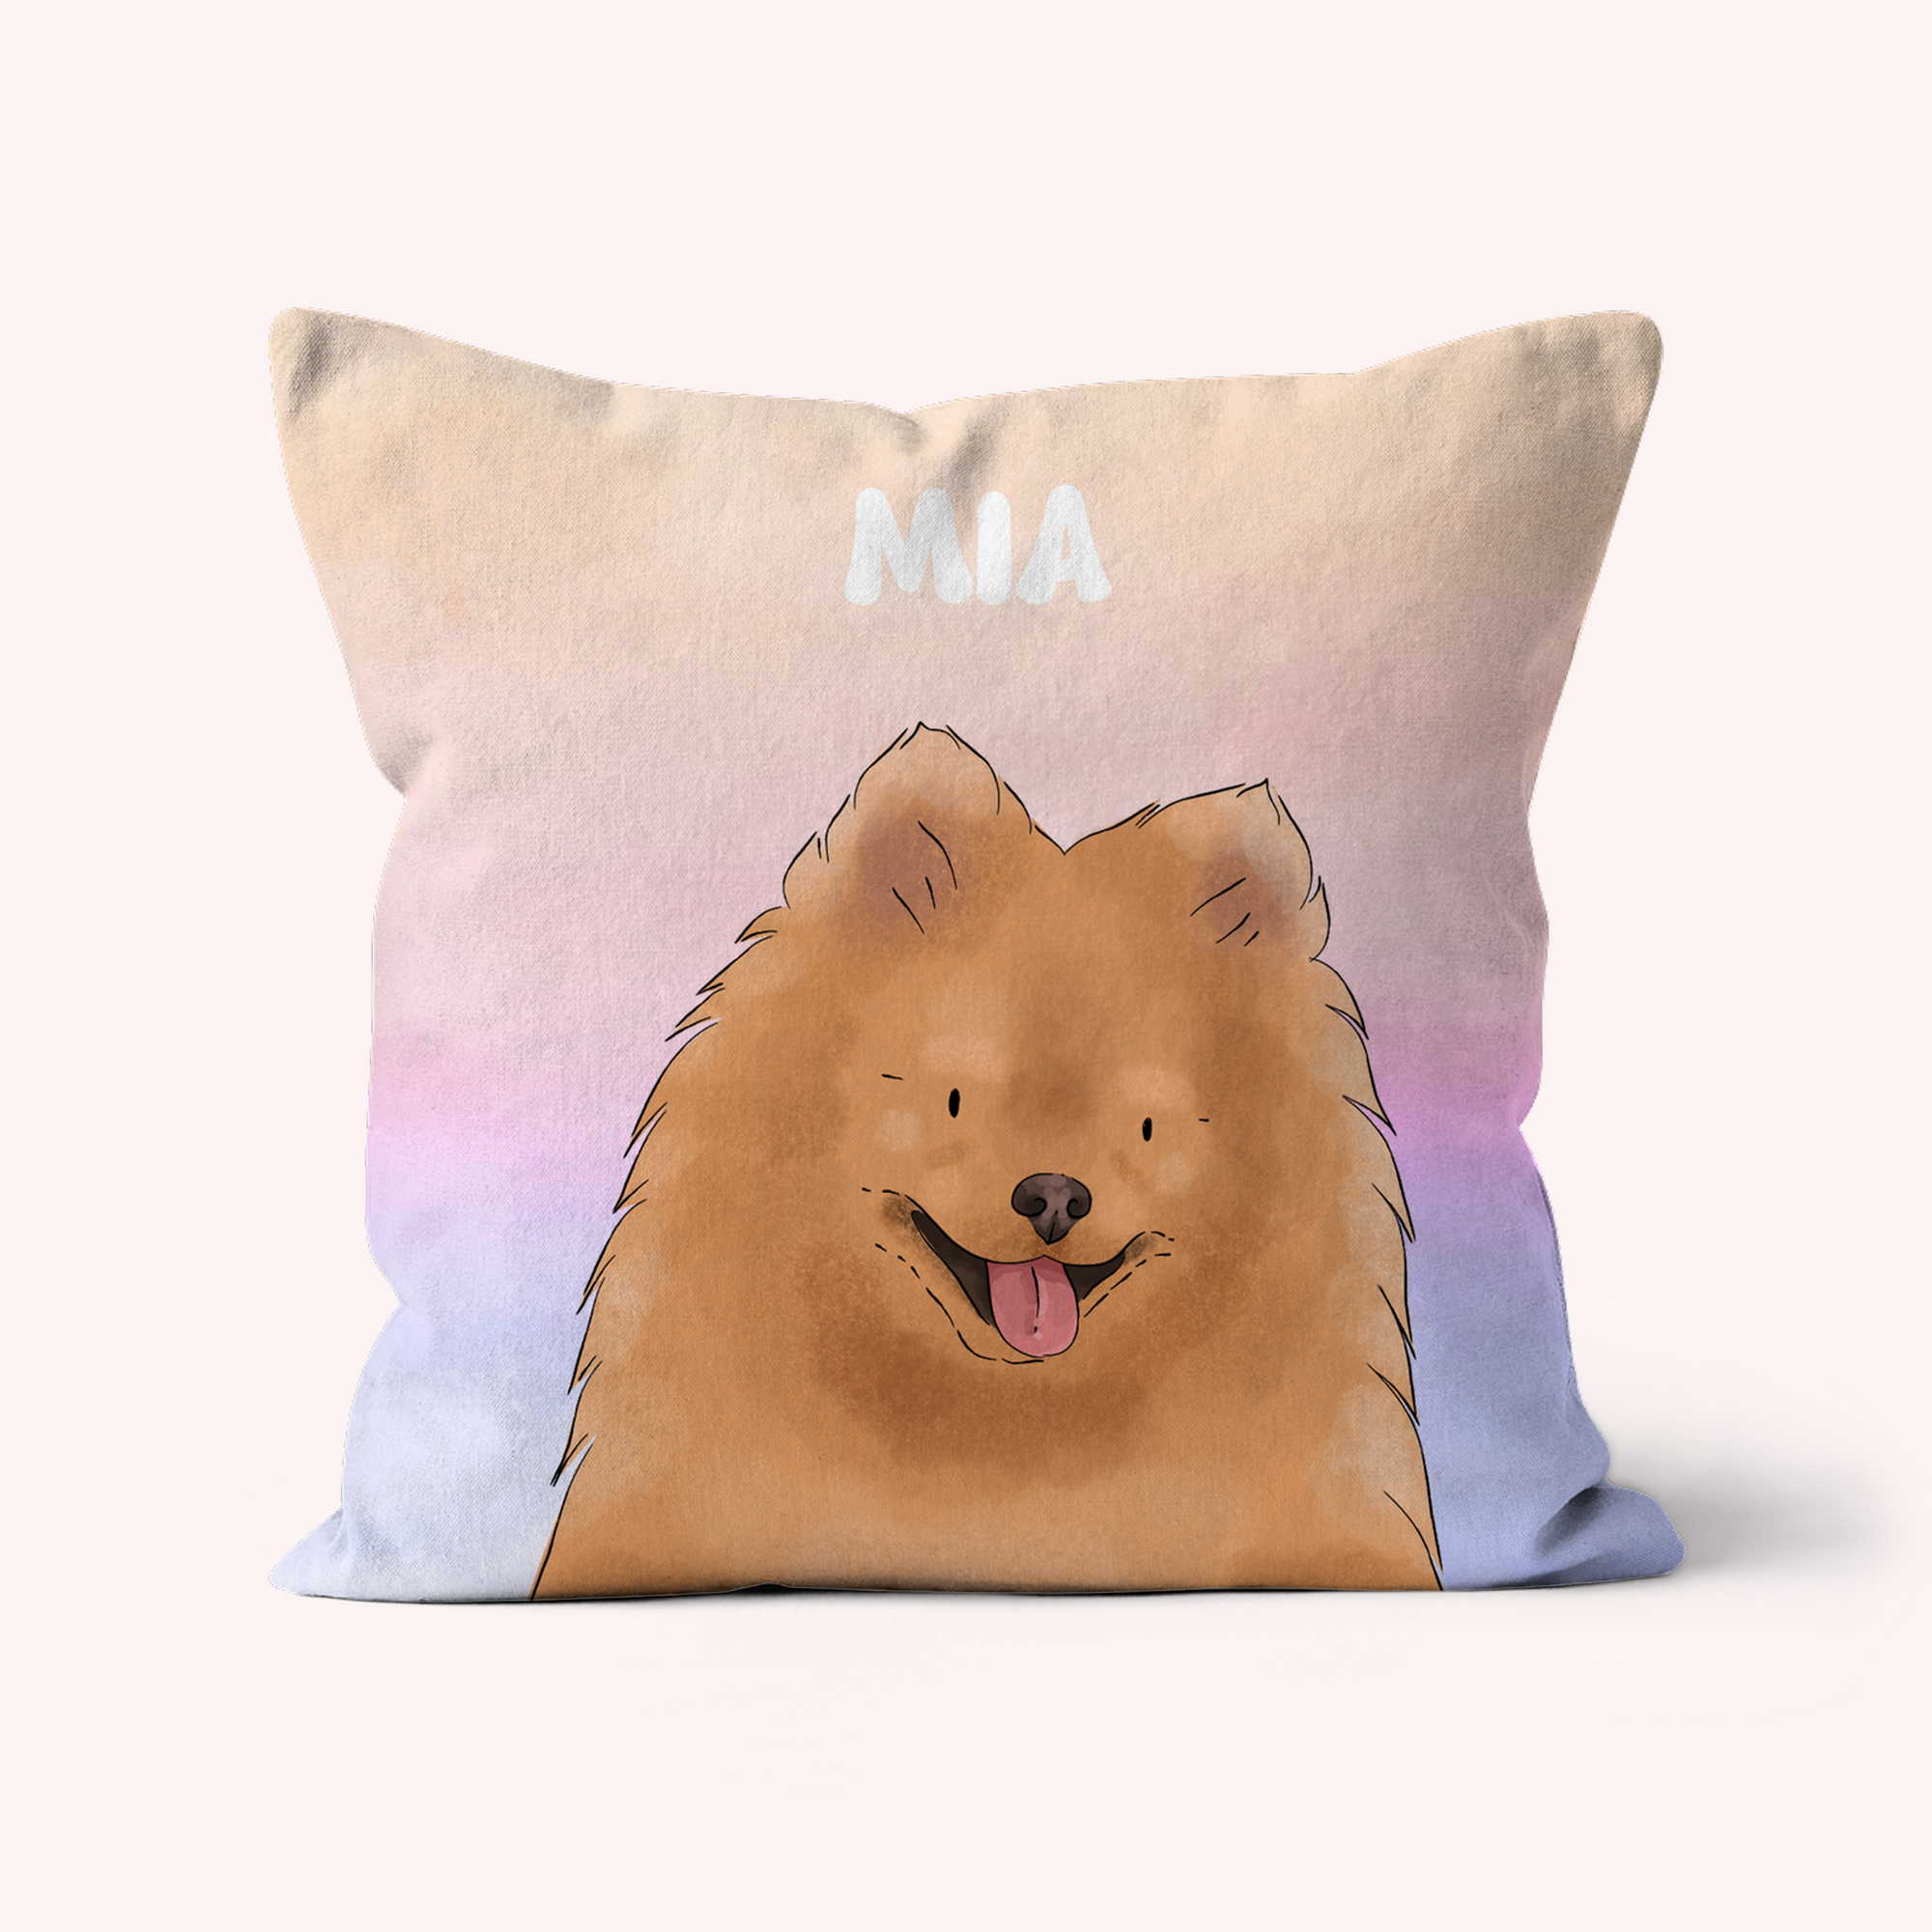 Paw & Glory, paw and glory, custom pet pillows, pillows with dogs picture, personalised pet pillow, pet pillow photo, pillows with dogs picture, pet pillow, Pet Portraits cushion,